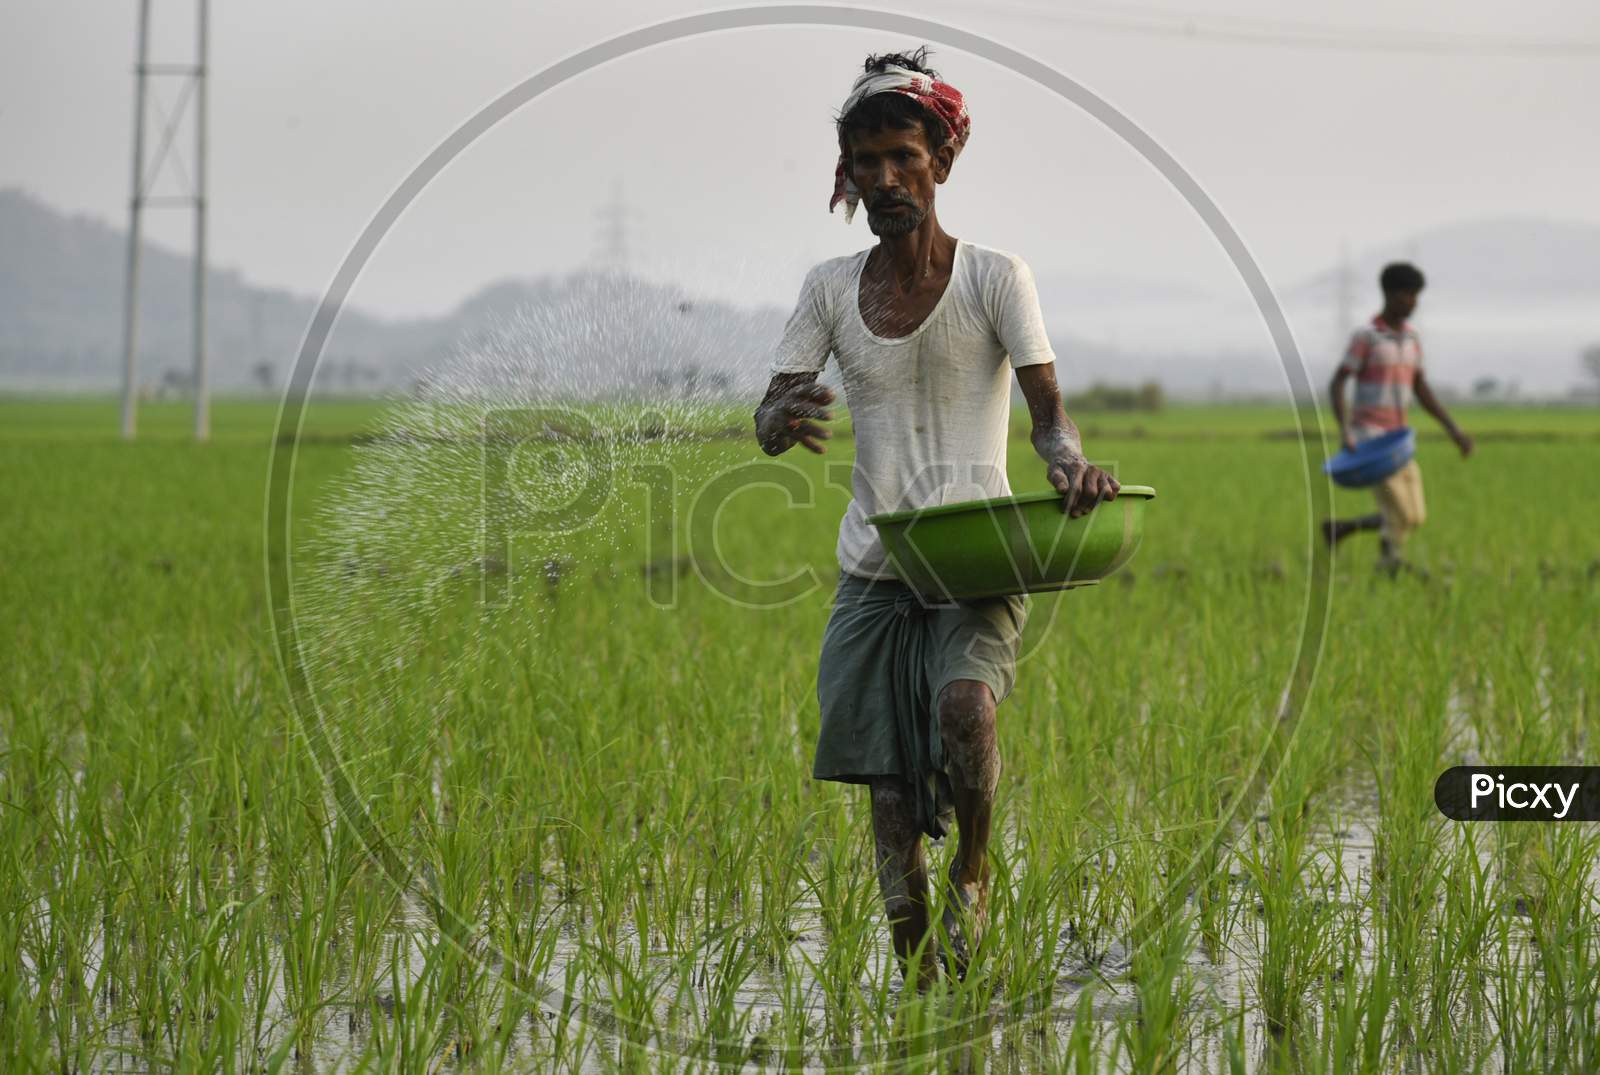 An Indian Farmer Scatters Fertilizer In His Newly Planted Paddy Field In The Morigaon District Of Assam, India, 1 March 2020